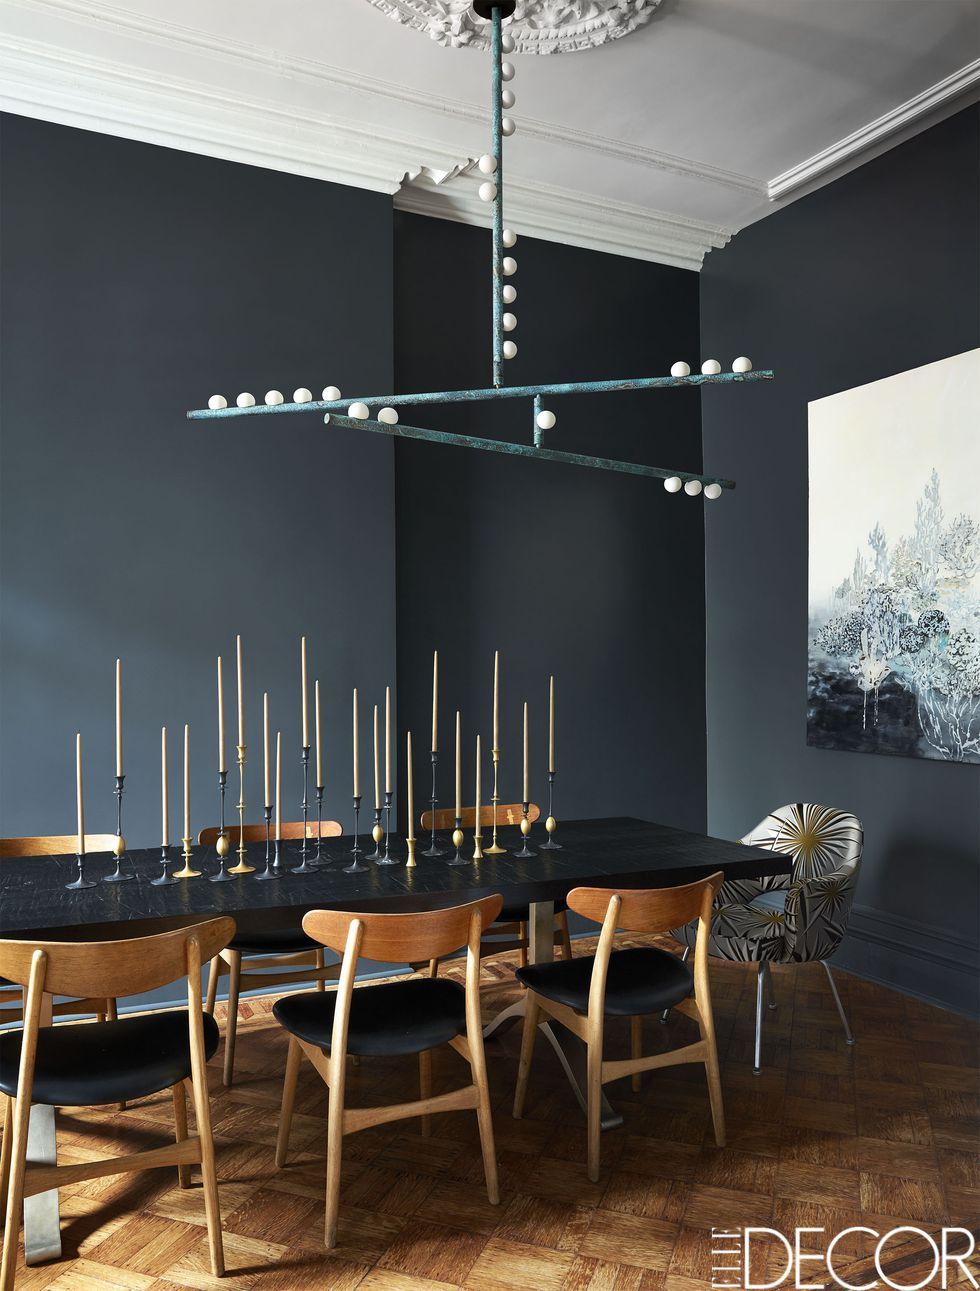 How To Use Black Wall Paint Decor, Black Dining Room